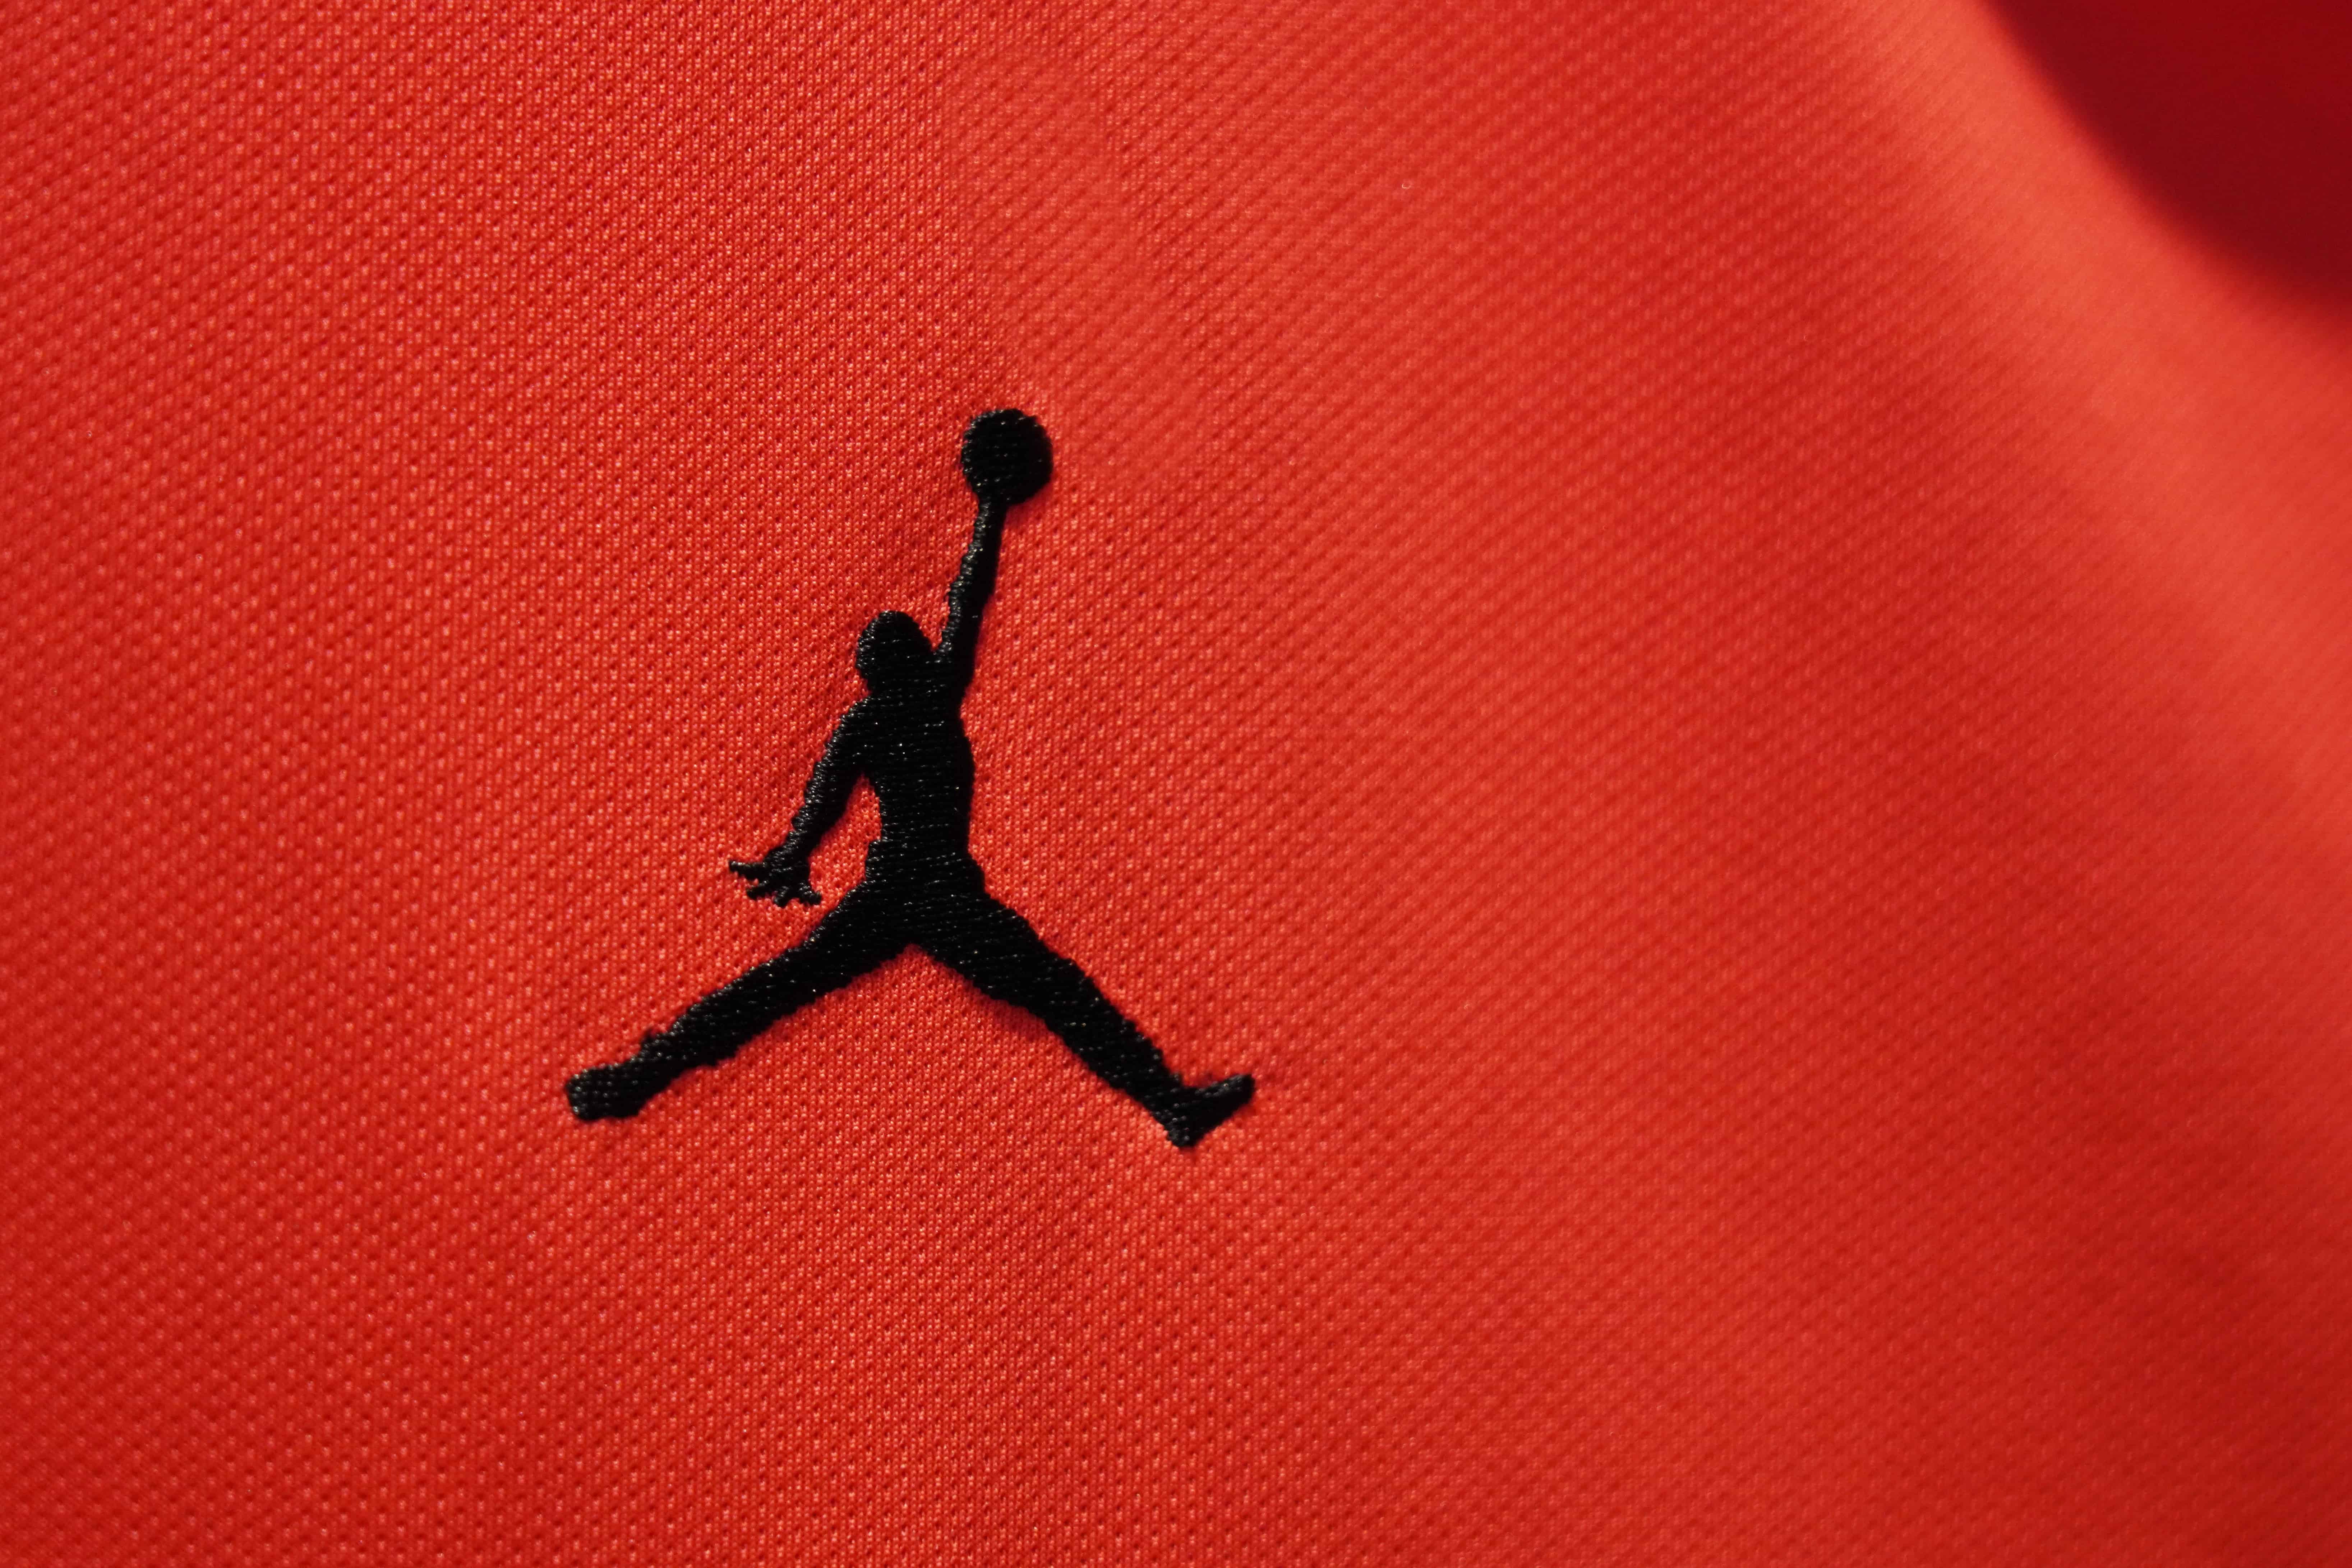 Michael Jordan Could Have Lost 1 of His More Unusual Honors Thanks